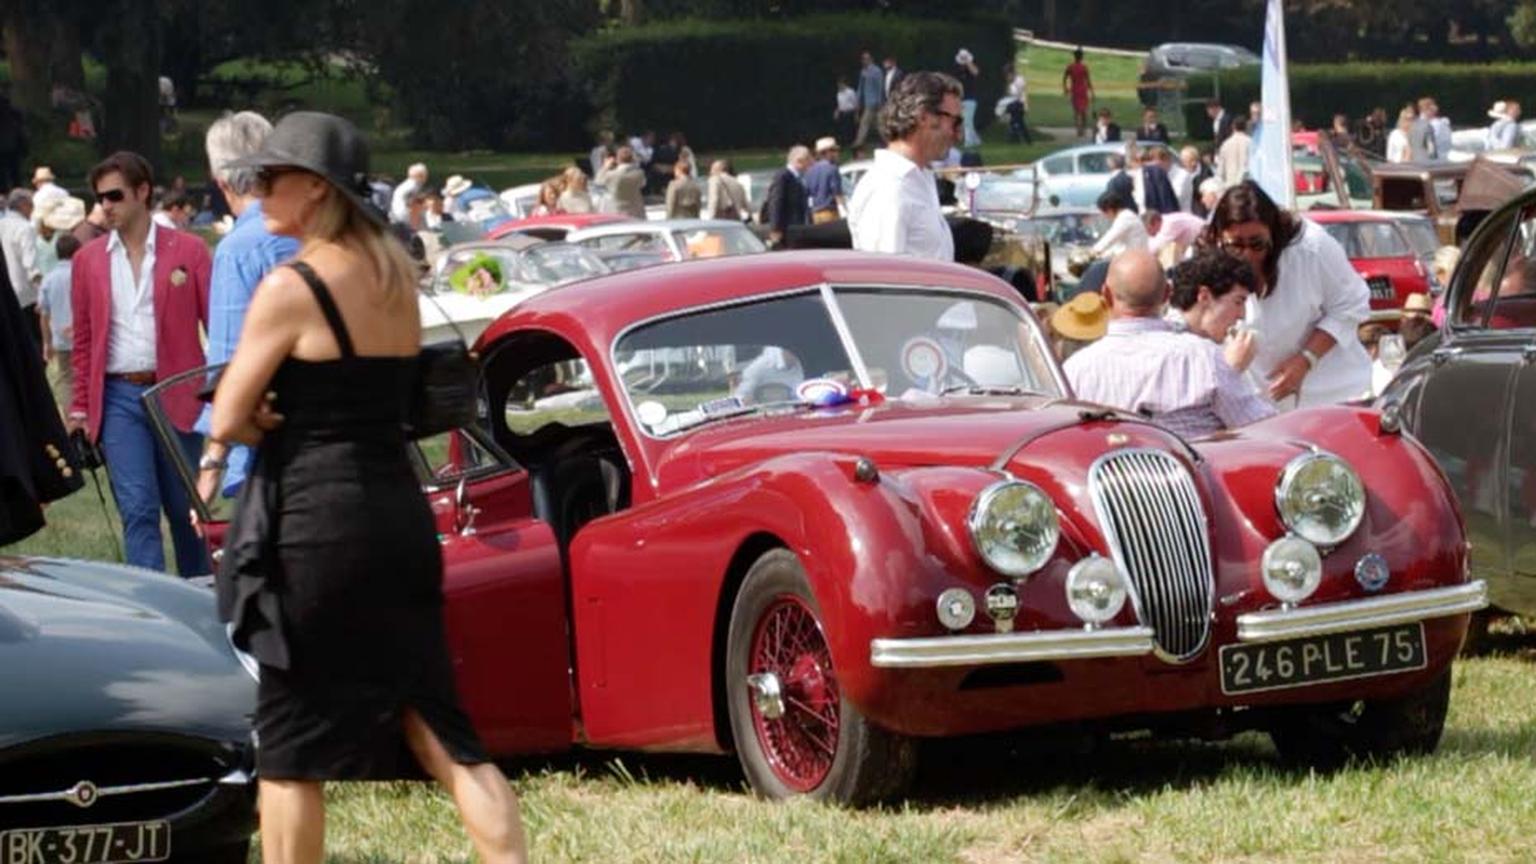 A parade of 500 classic, vintage and concept cars, which competed in various categories, was the main focus at Chantilly Arts & Elegance.